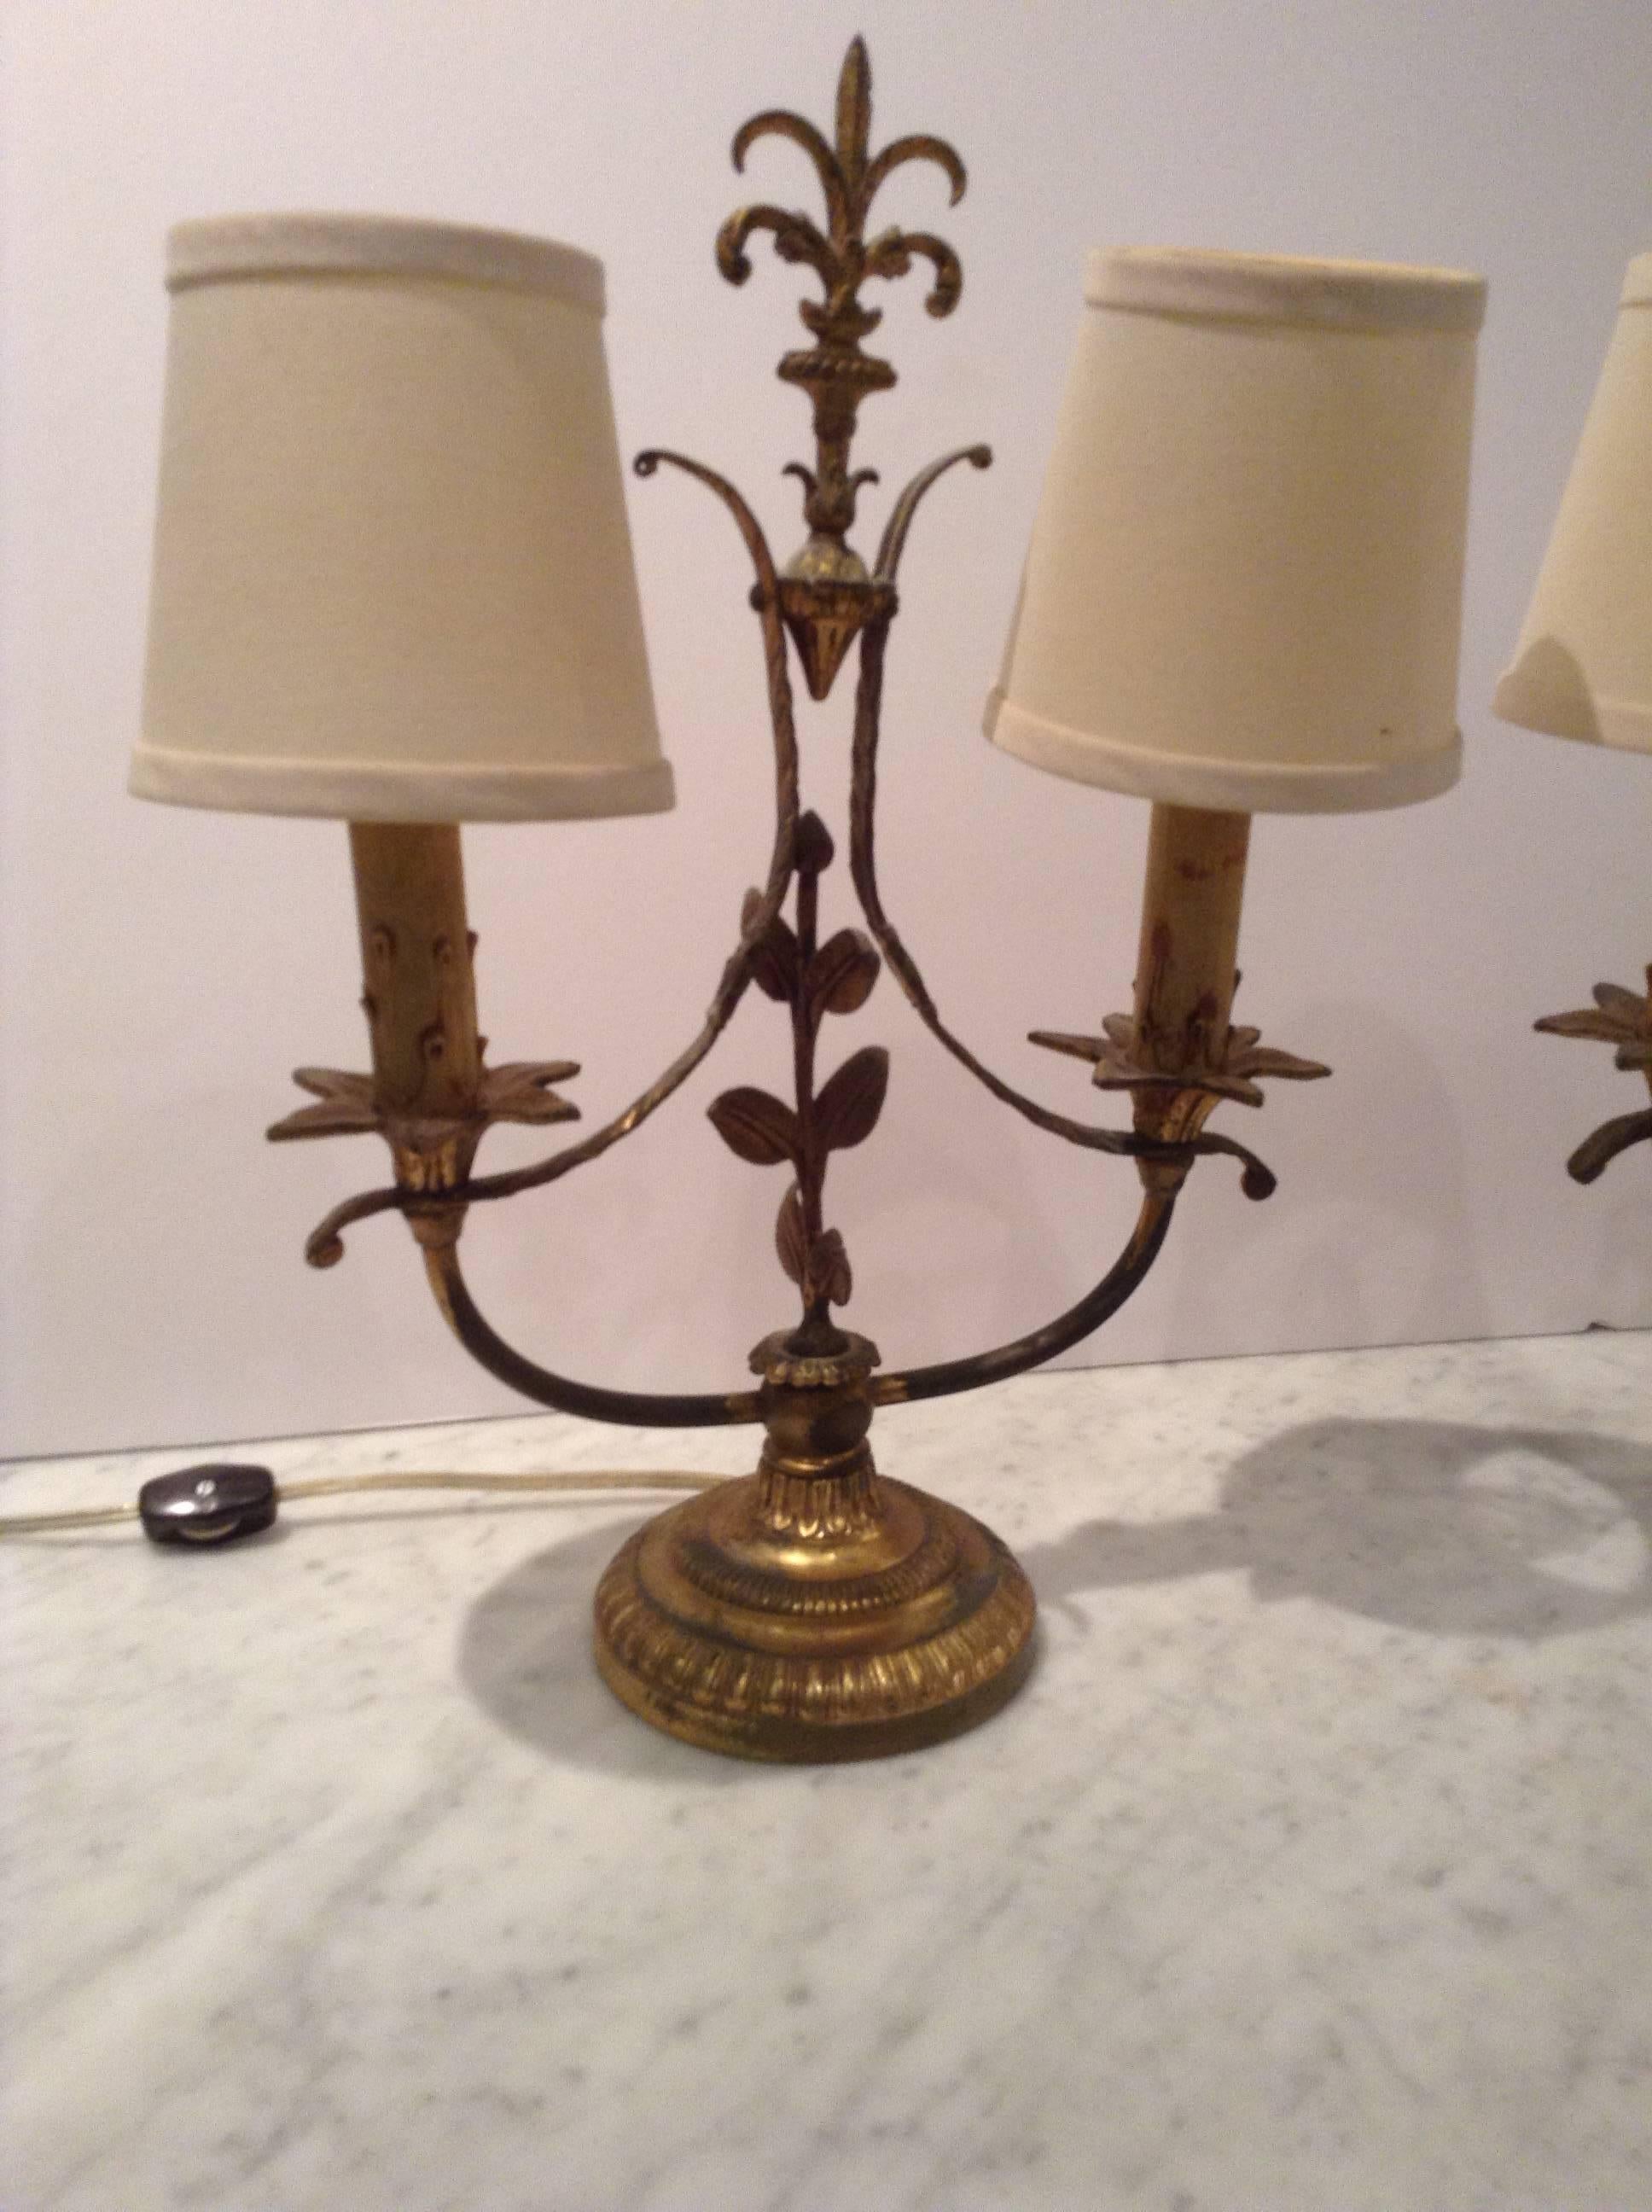 Beautiful pair of antique French lamps in gilt metal in a leaf and feather-like design. Off-white fabric shades.